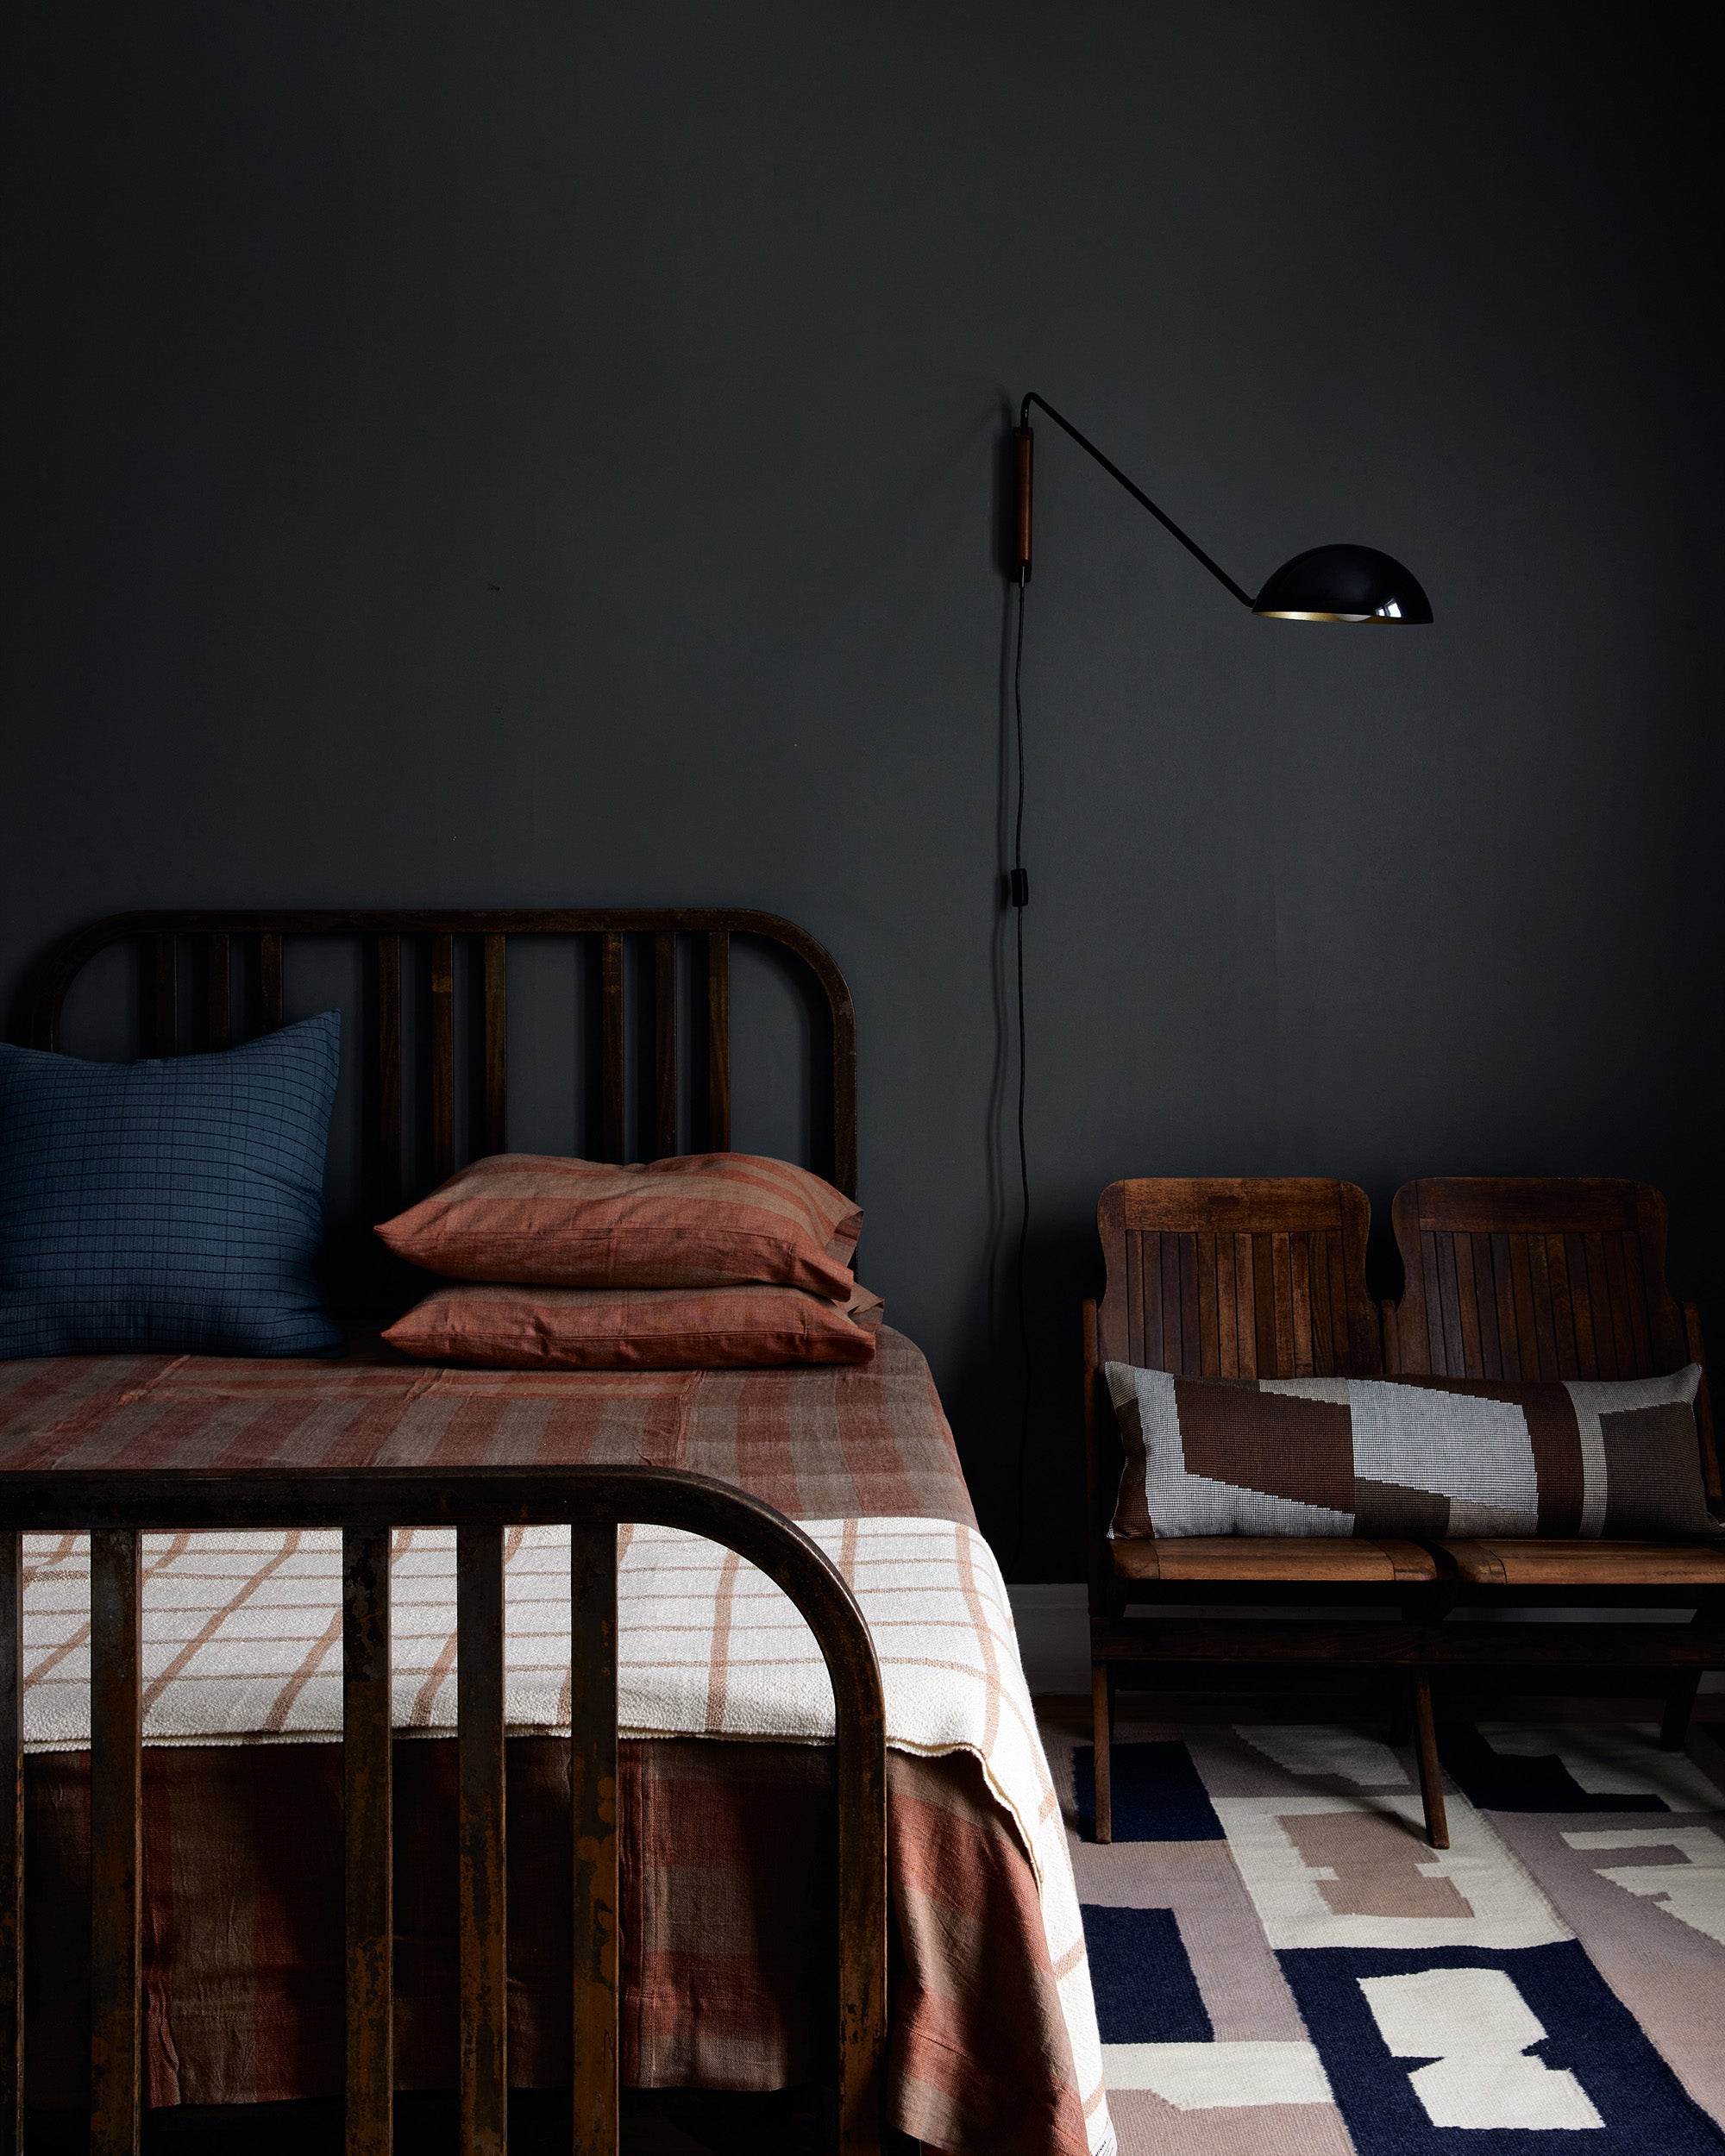 Dark bedroom decor with ethically handwoven bedding, blankets, and decorative throw pillows by MINNA